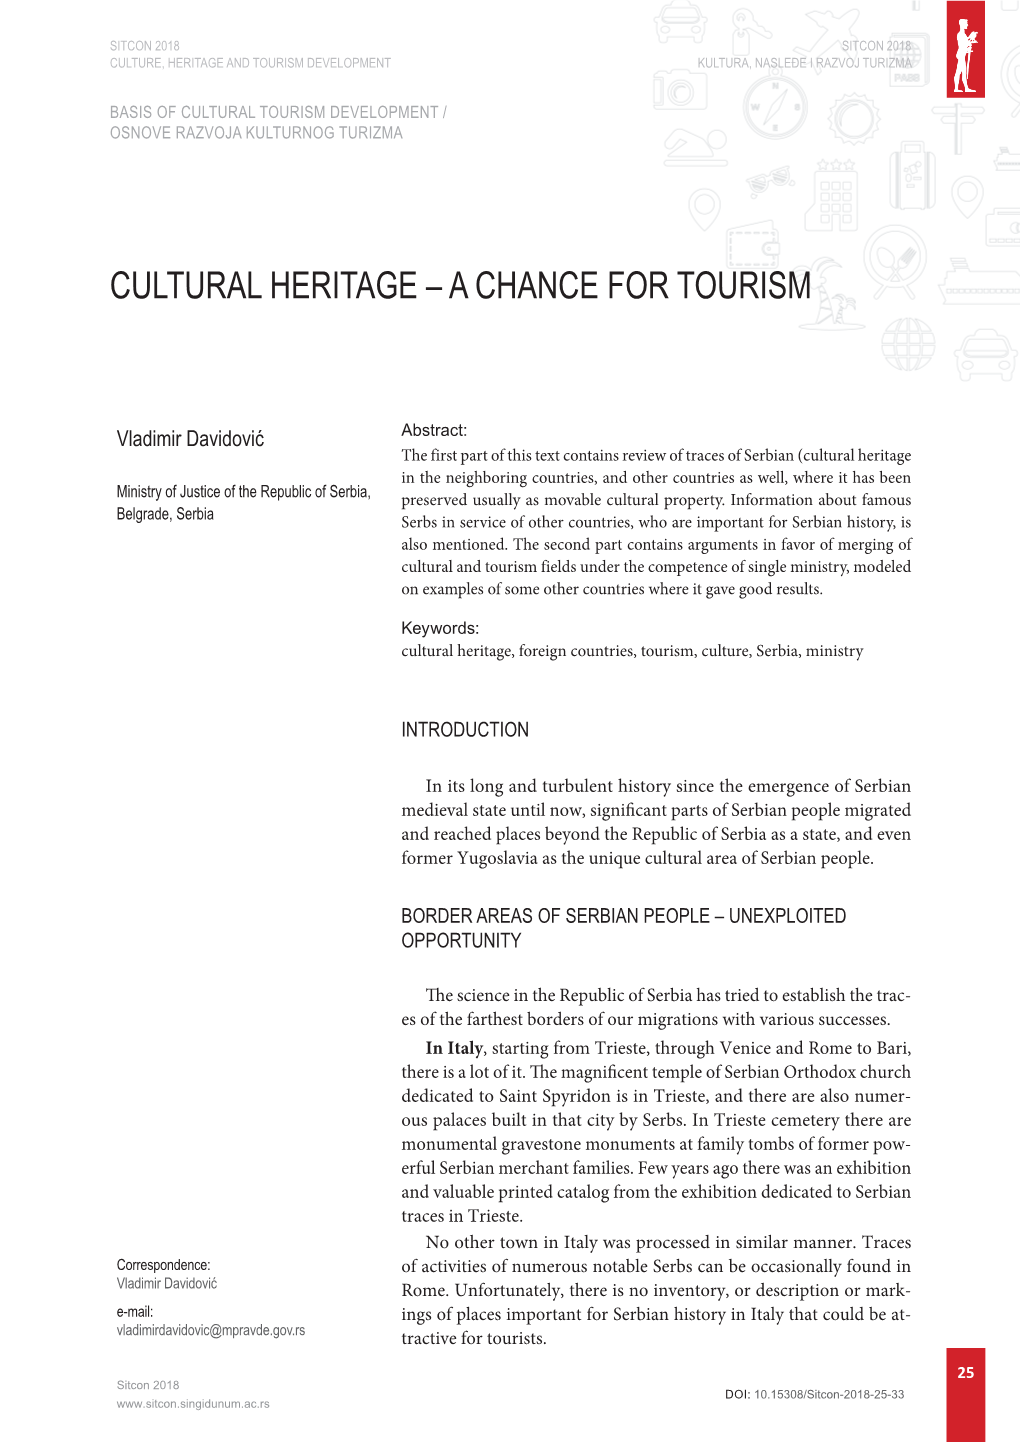 Cultural Heritage – a Chance for Tourism